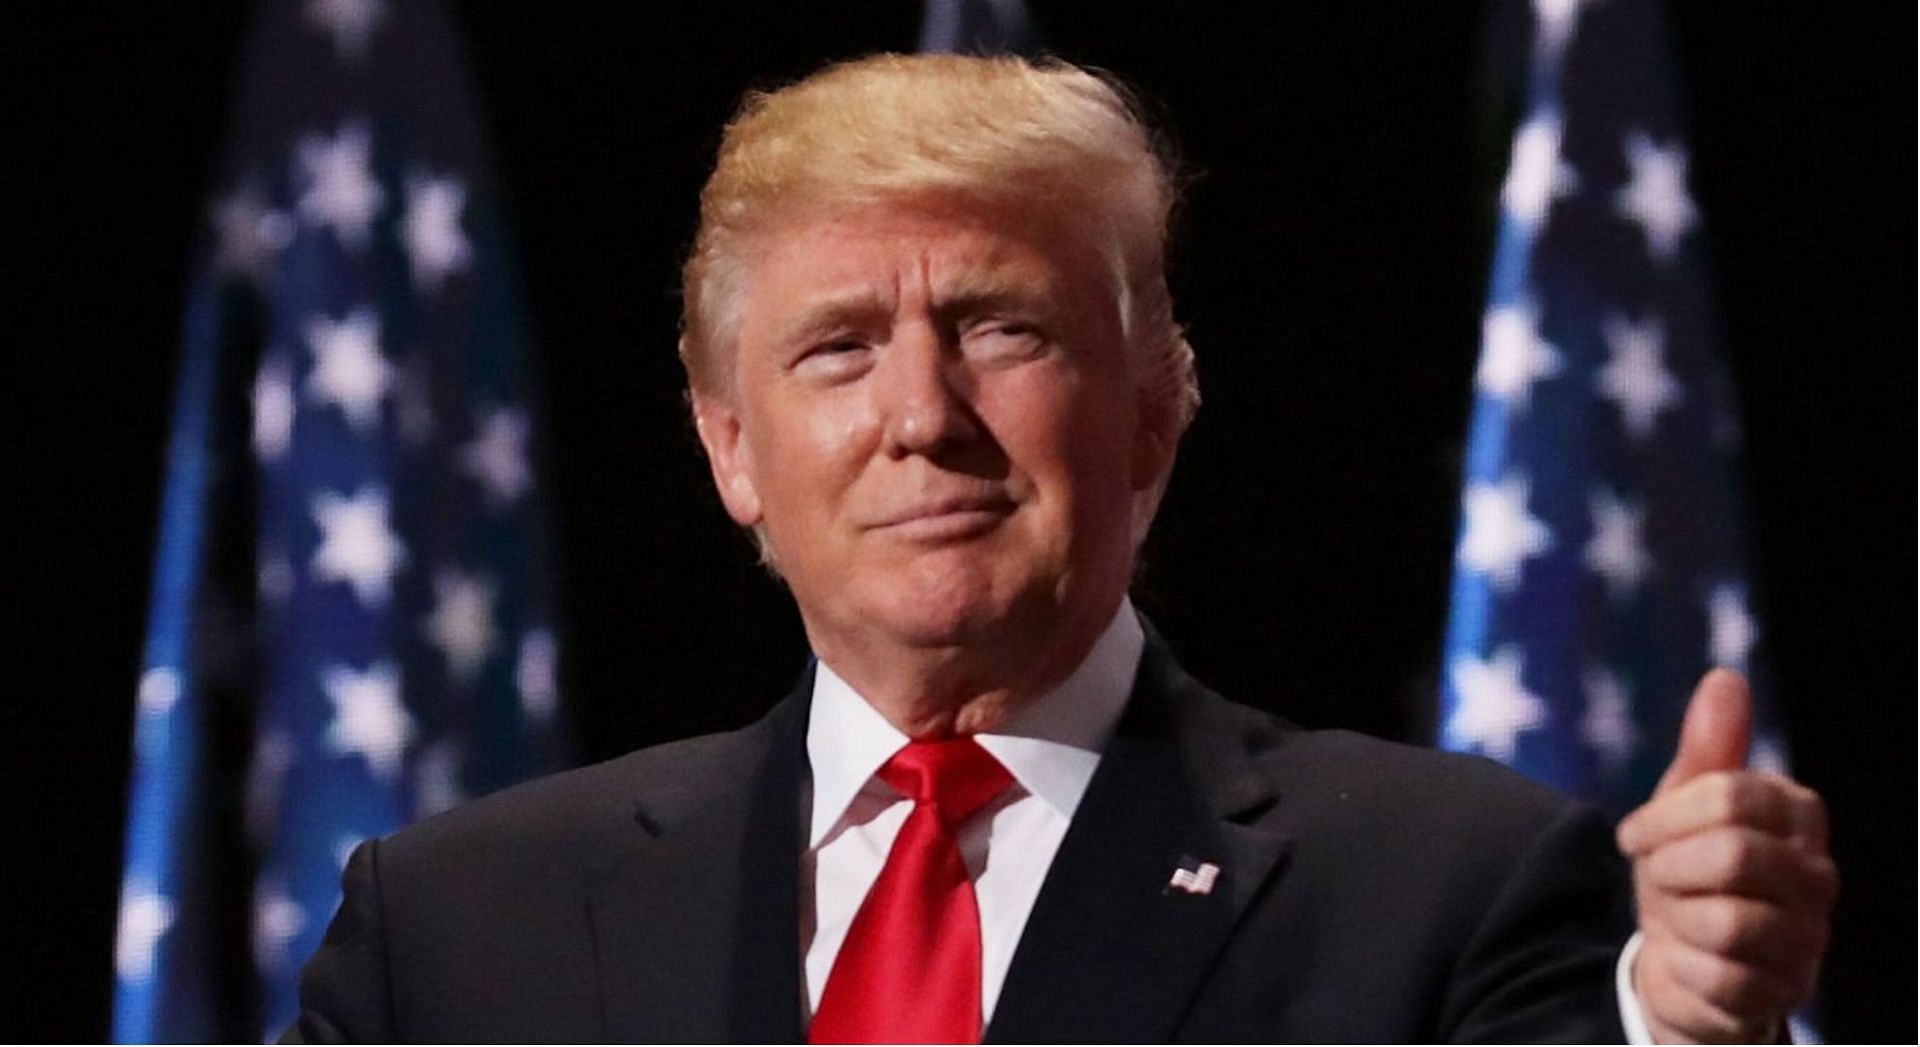 Speculations are rife that Donald Trump is likely to run for the 2024 US presidential election (Image via Getty Images)